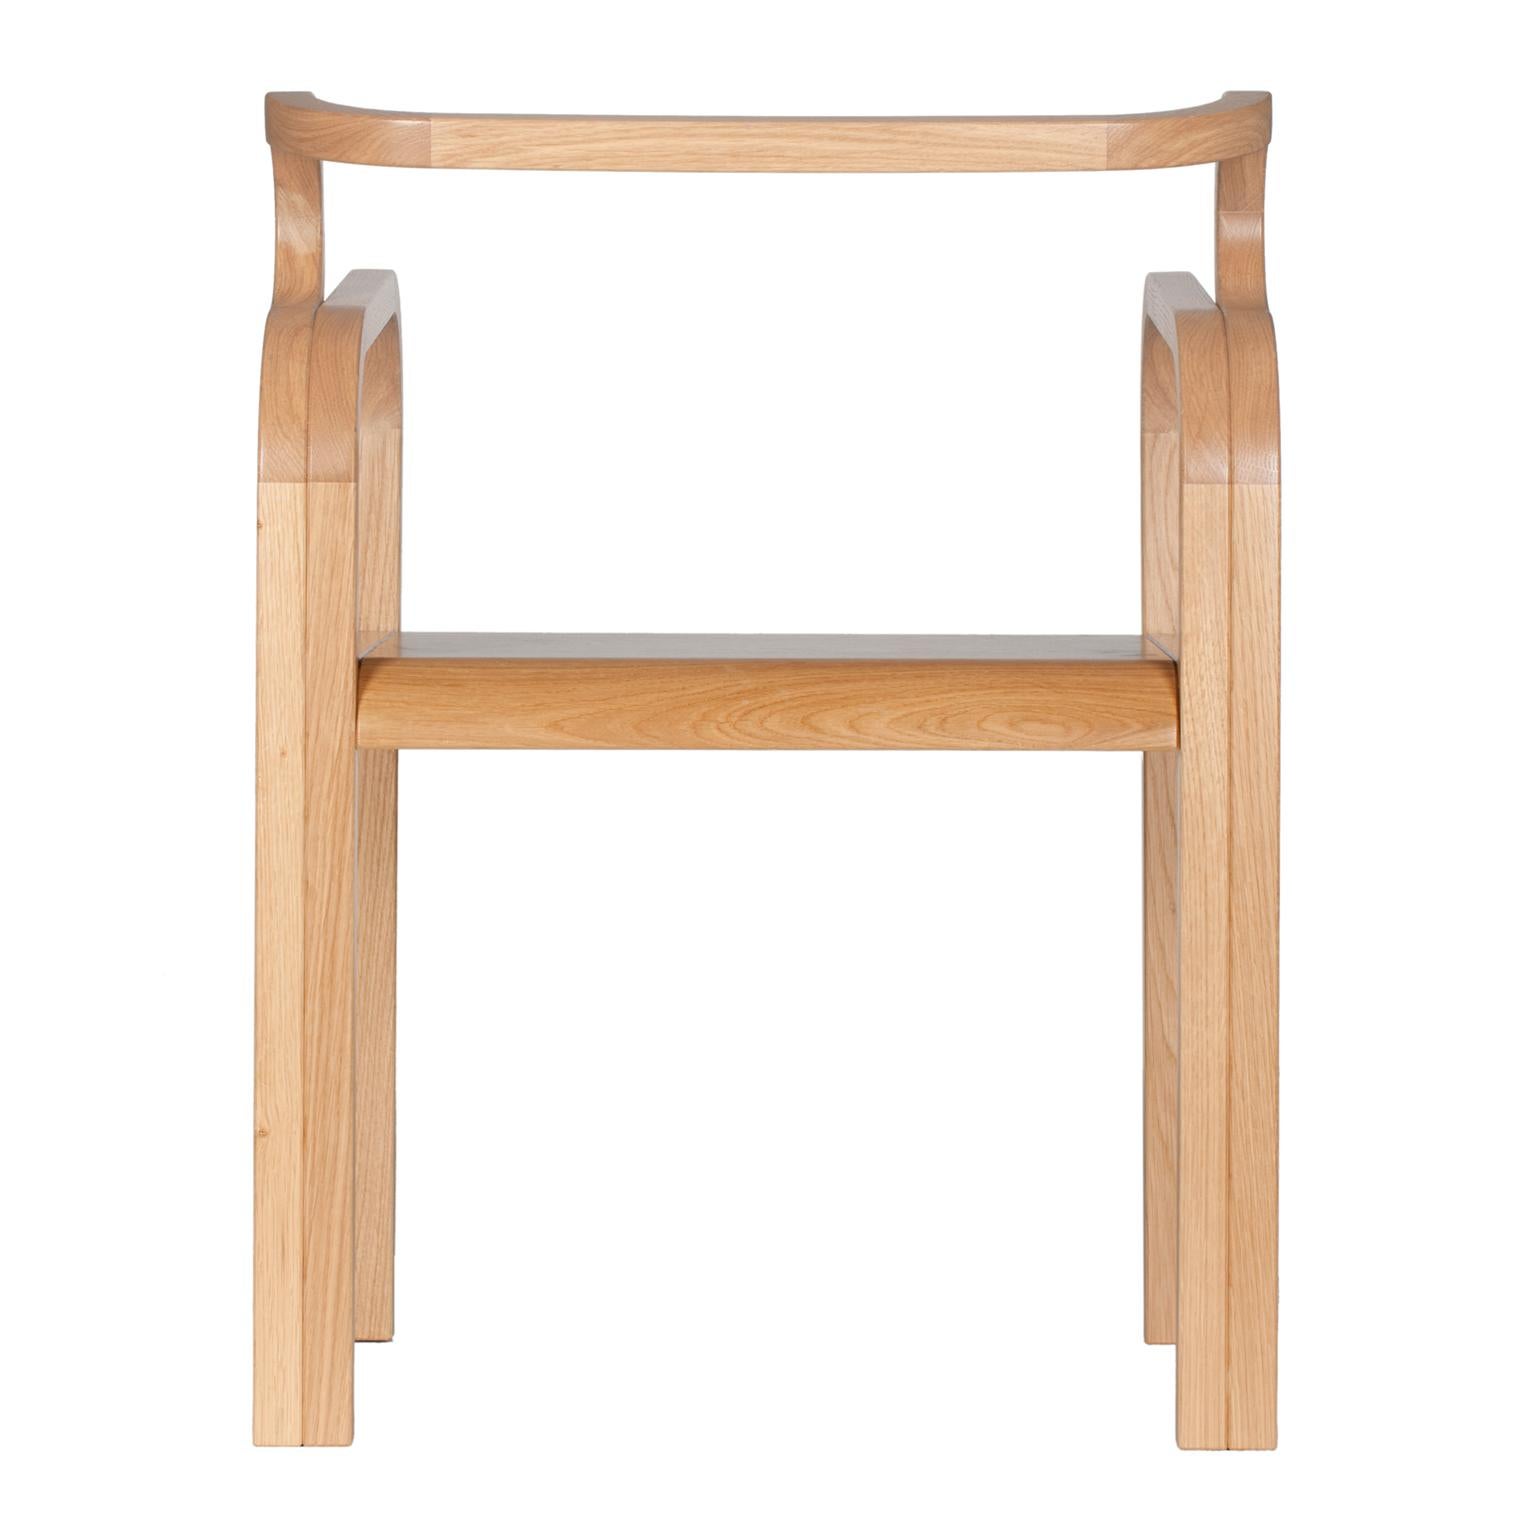 Odette Oak Chair by Fred and Juul
Dimensions: D 51 x W 58 x H 75 cm.
Materials: Oak.

Available in different oak finishes. Custom sizes, materials or finishes are available. Please contact us.

Odette elegantly shows that a wooden chair can recall